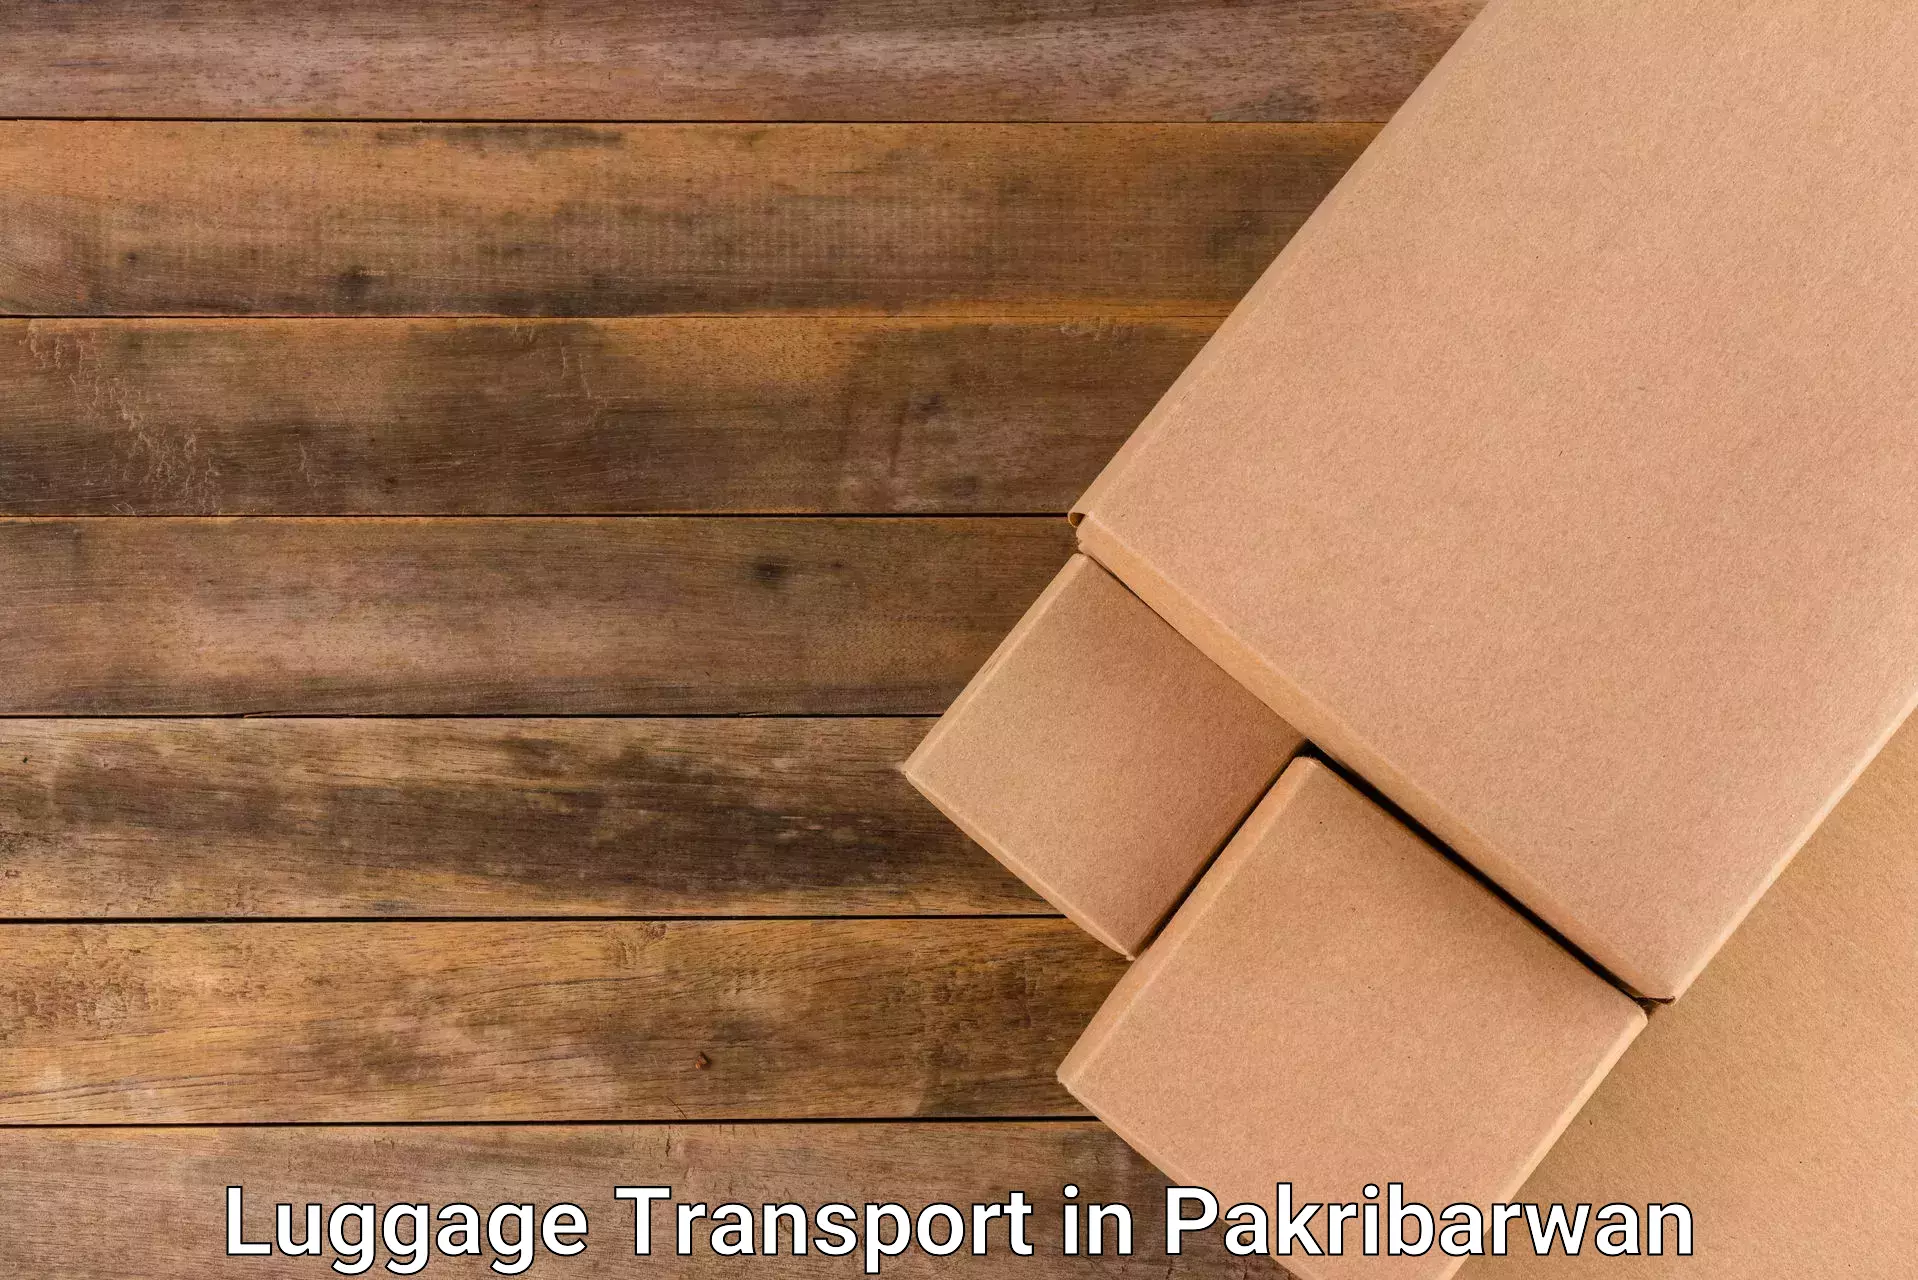 Express luggage delivery in Pakribarwan